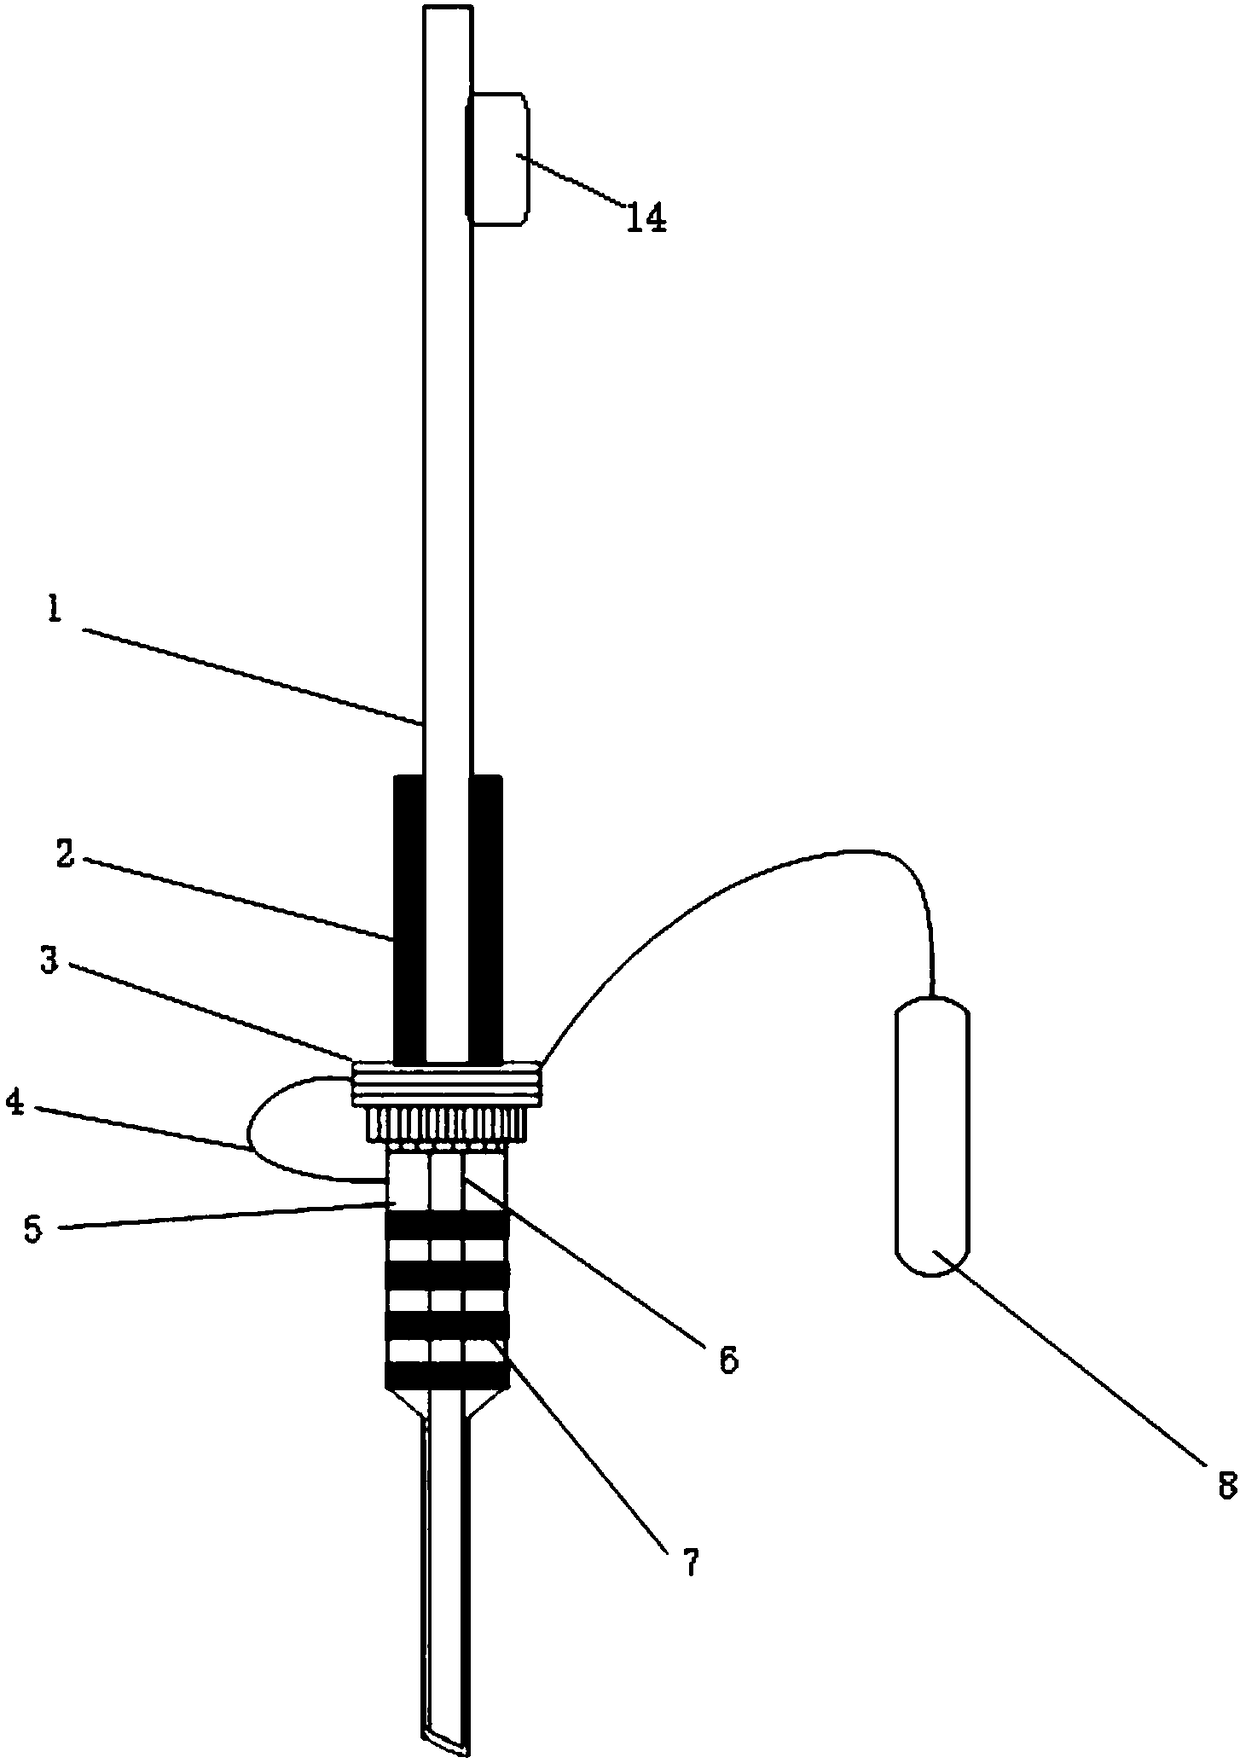 Artery-vein puncture needle with novel structure and functions